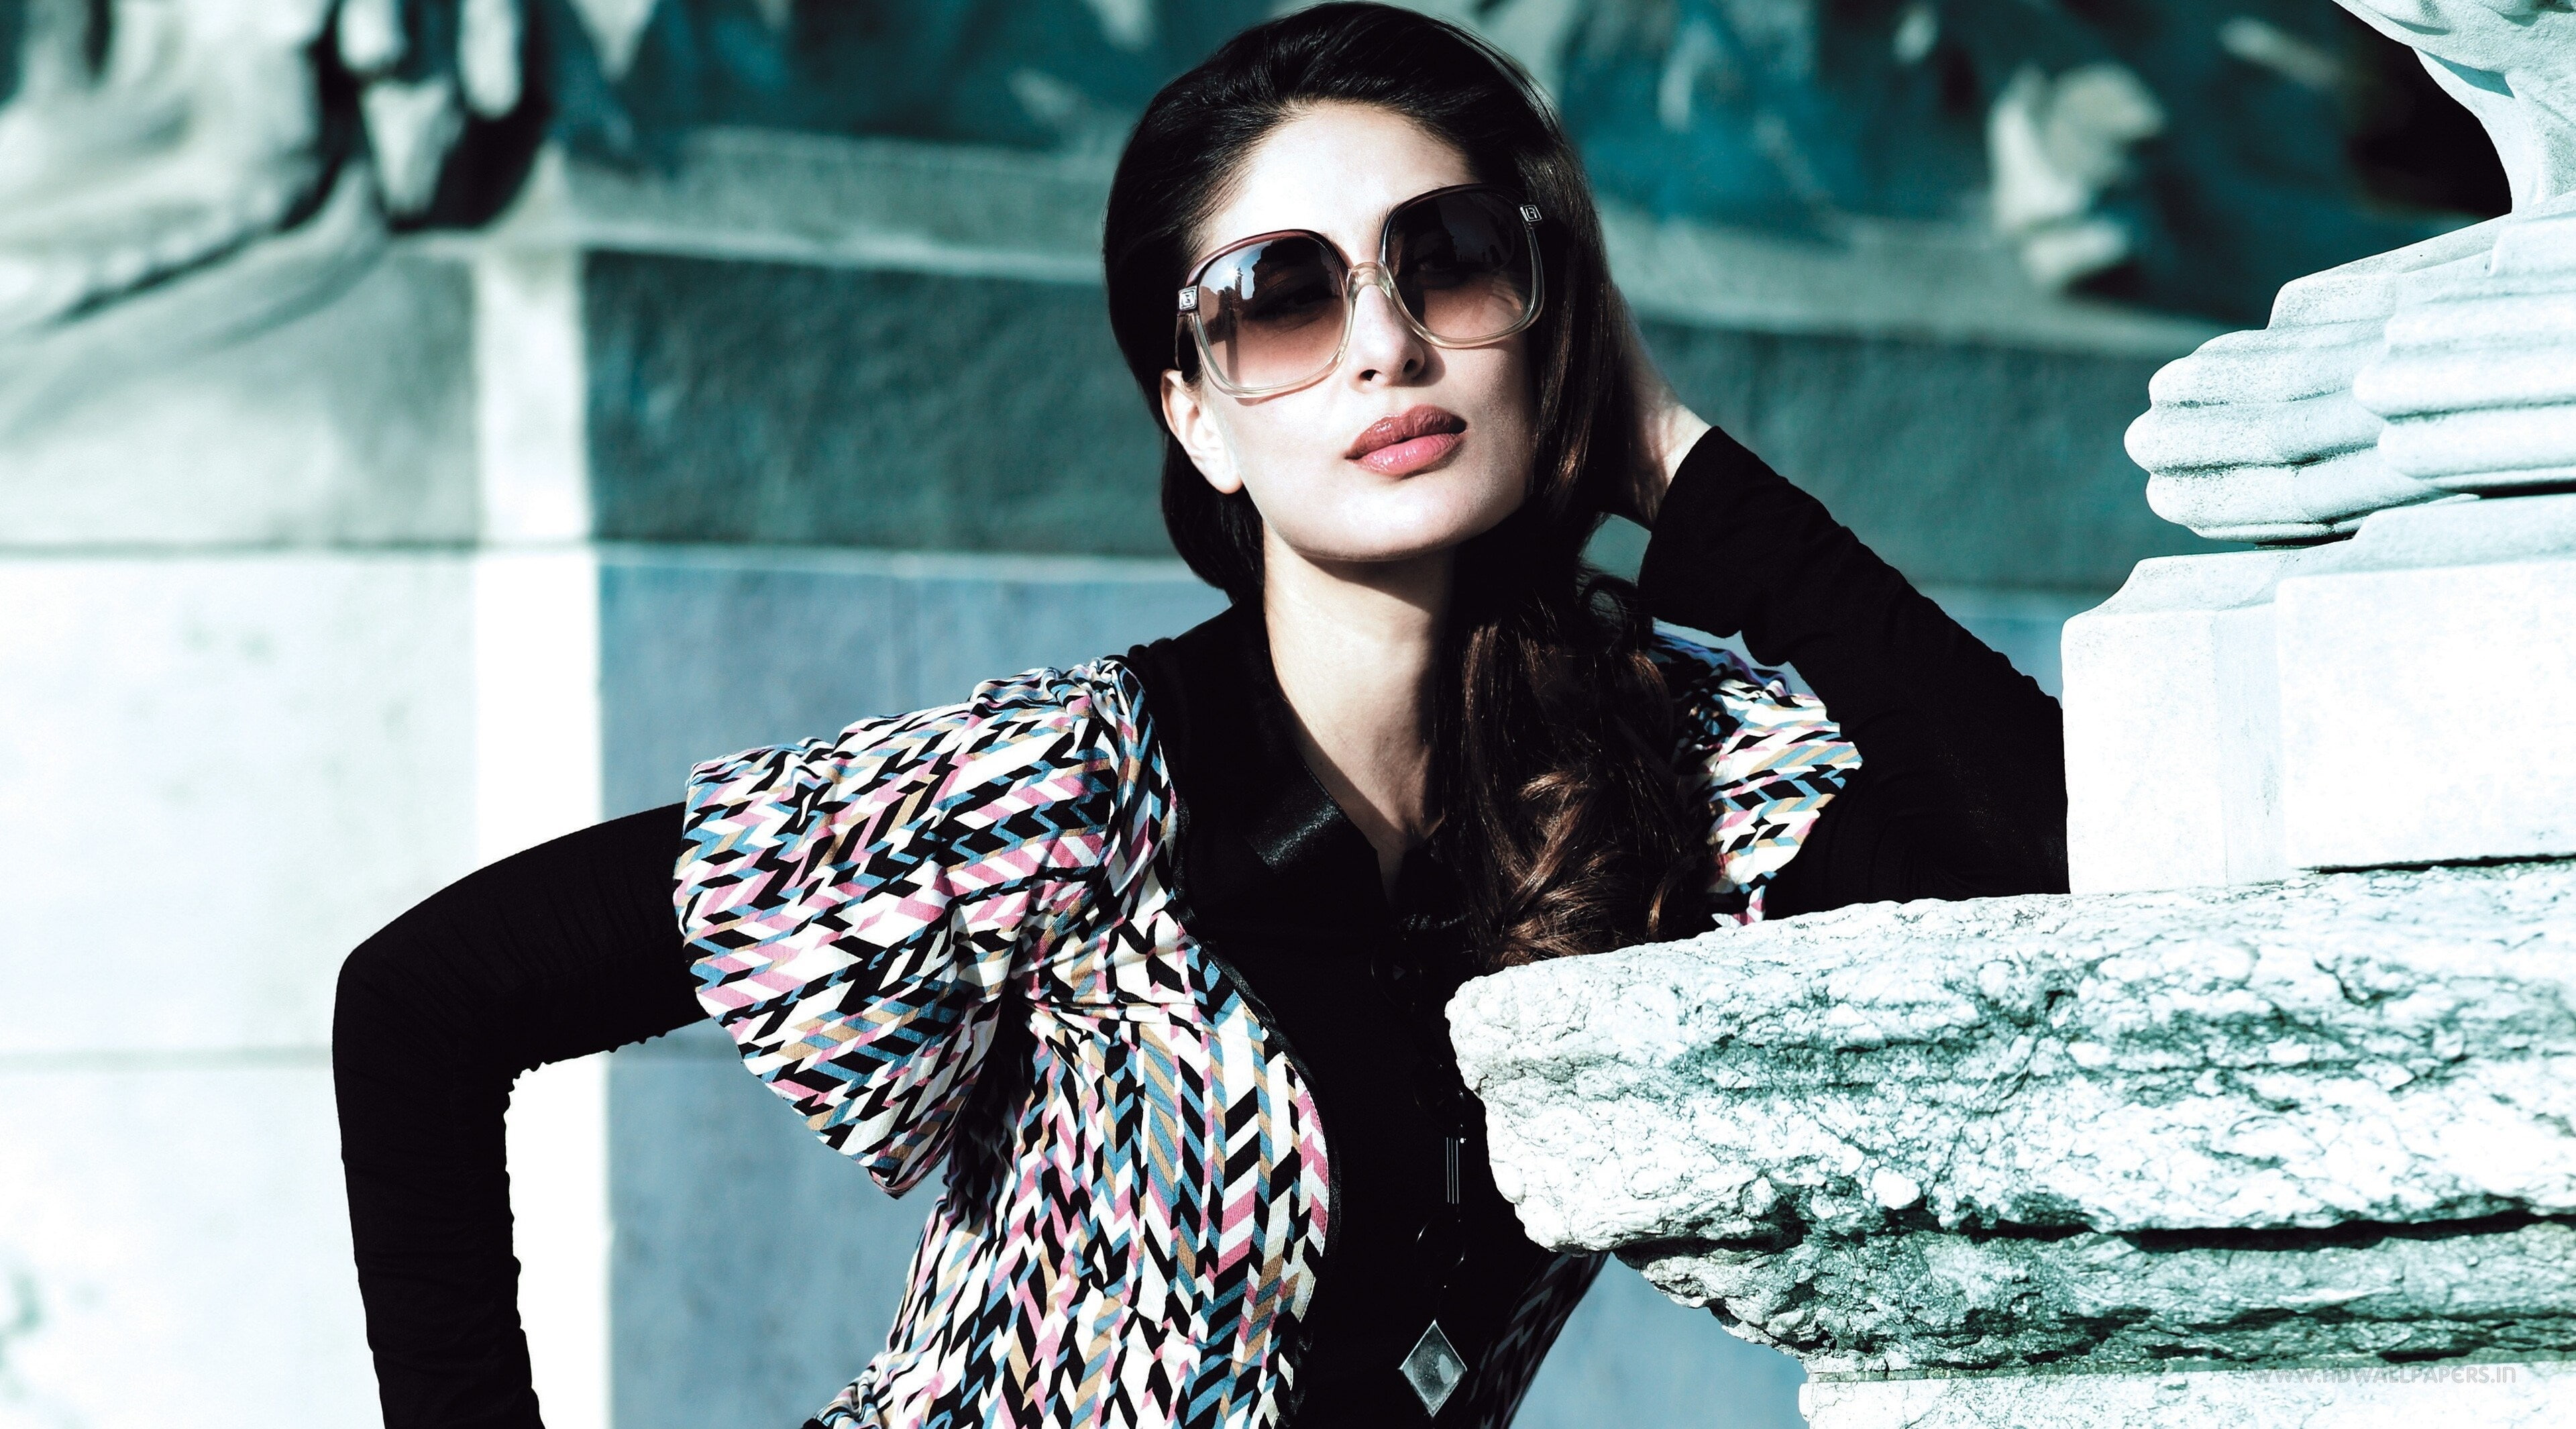 kareena kapoor 4k pic of, fashion, one person, young adult